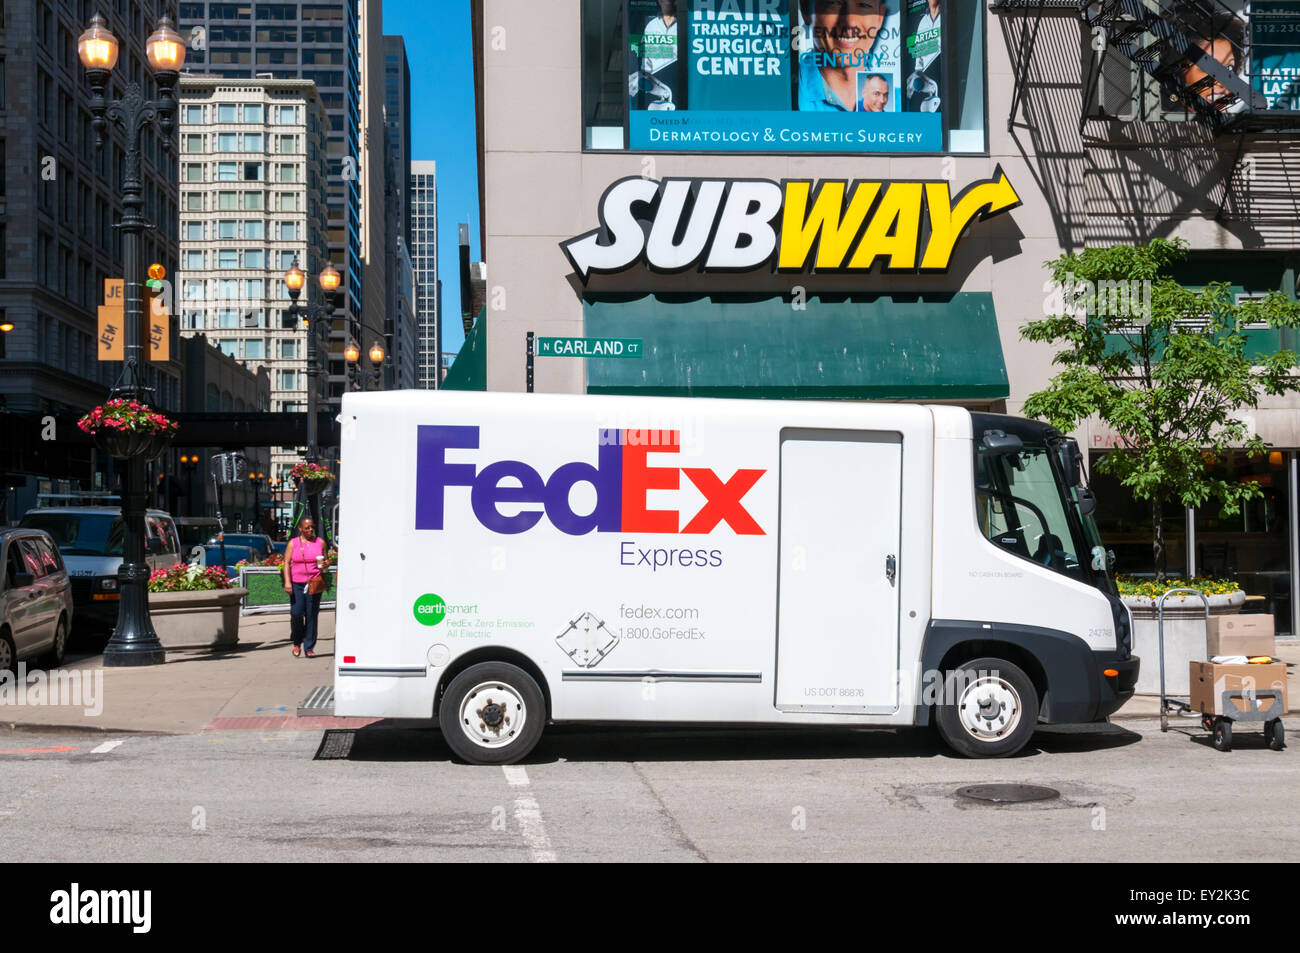 A FedEx Express all electric zero emissions delivery van outside a Subway fast food restaurant in Chicago. Stock Photo